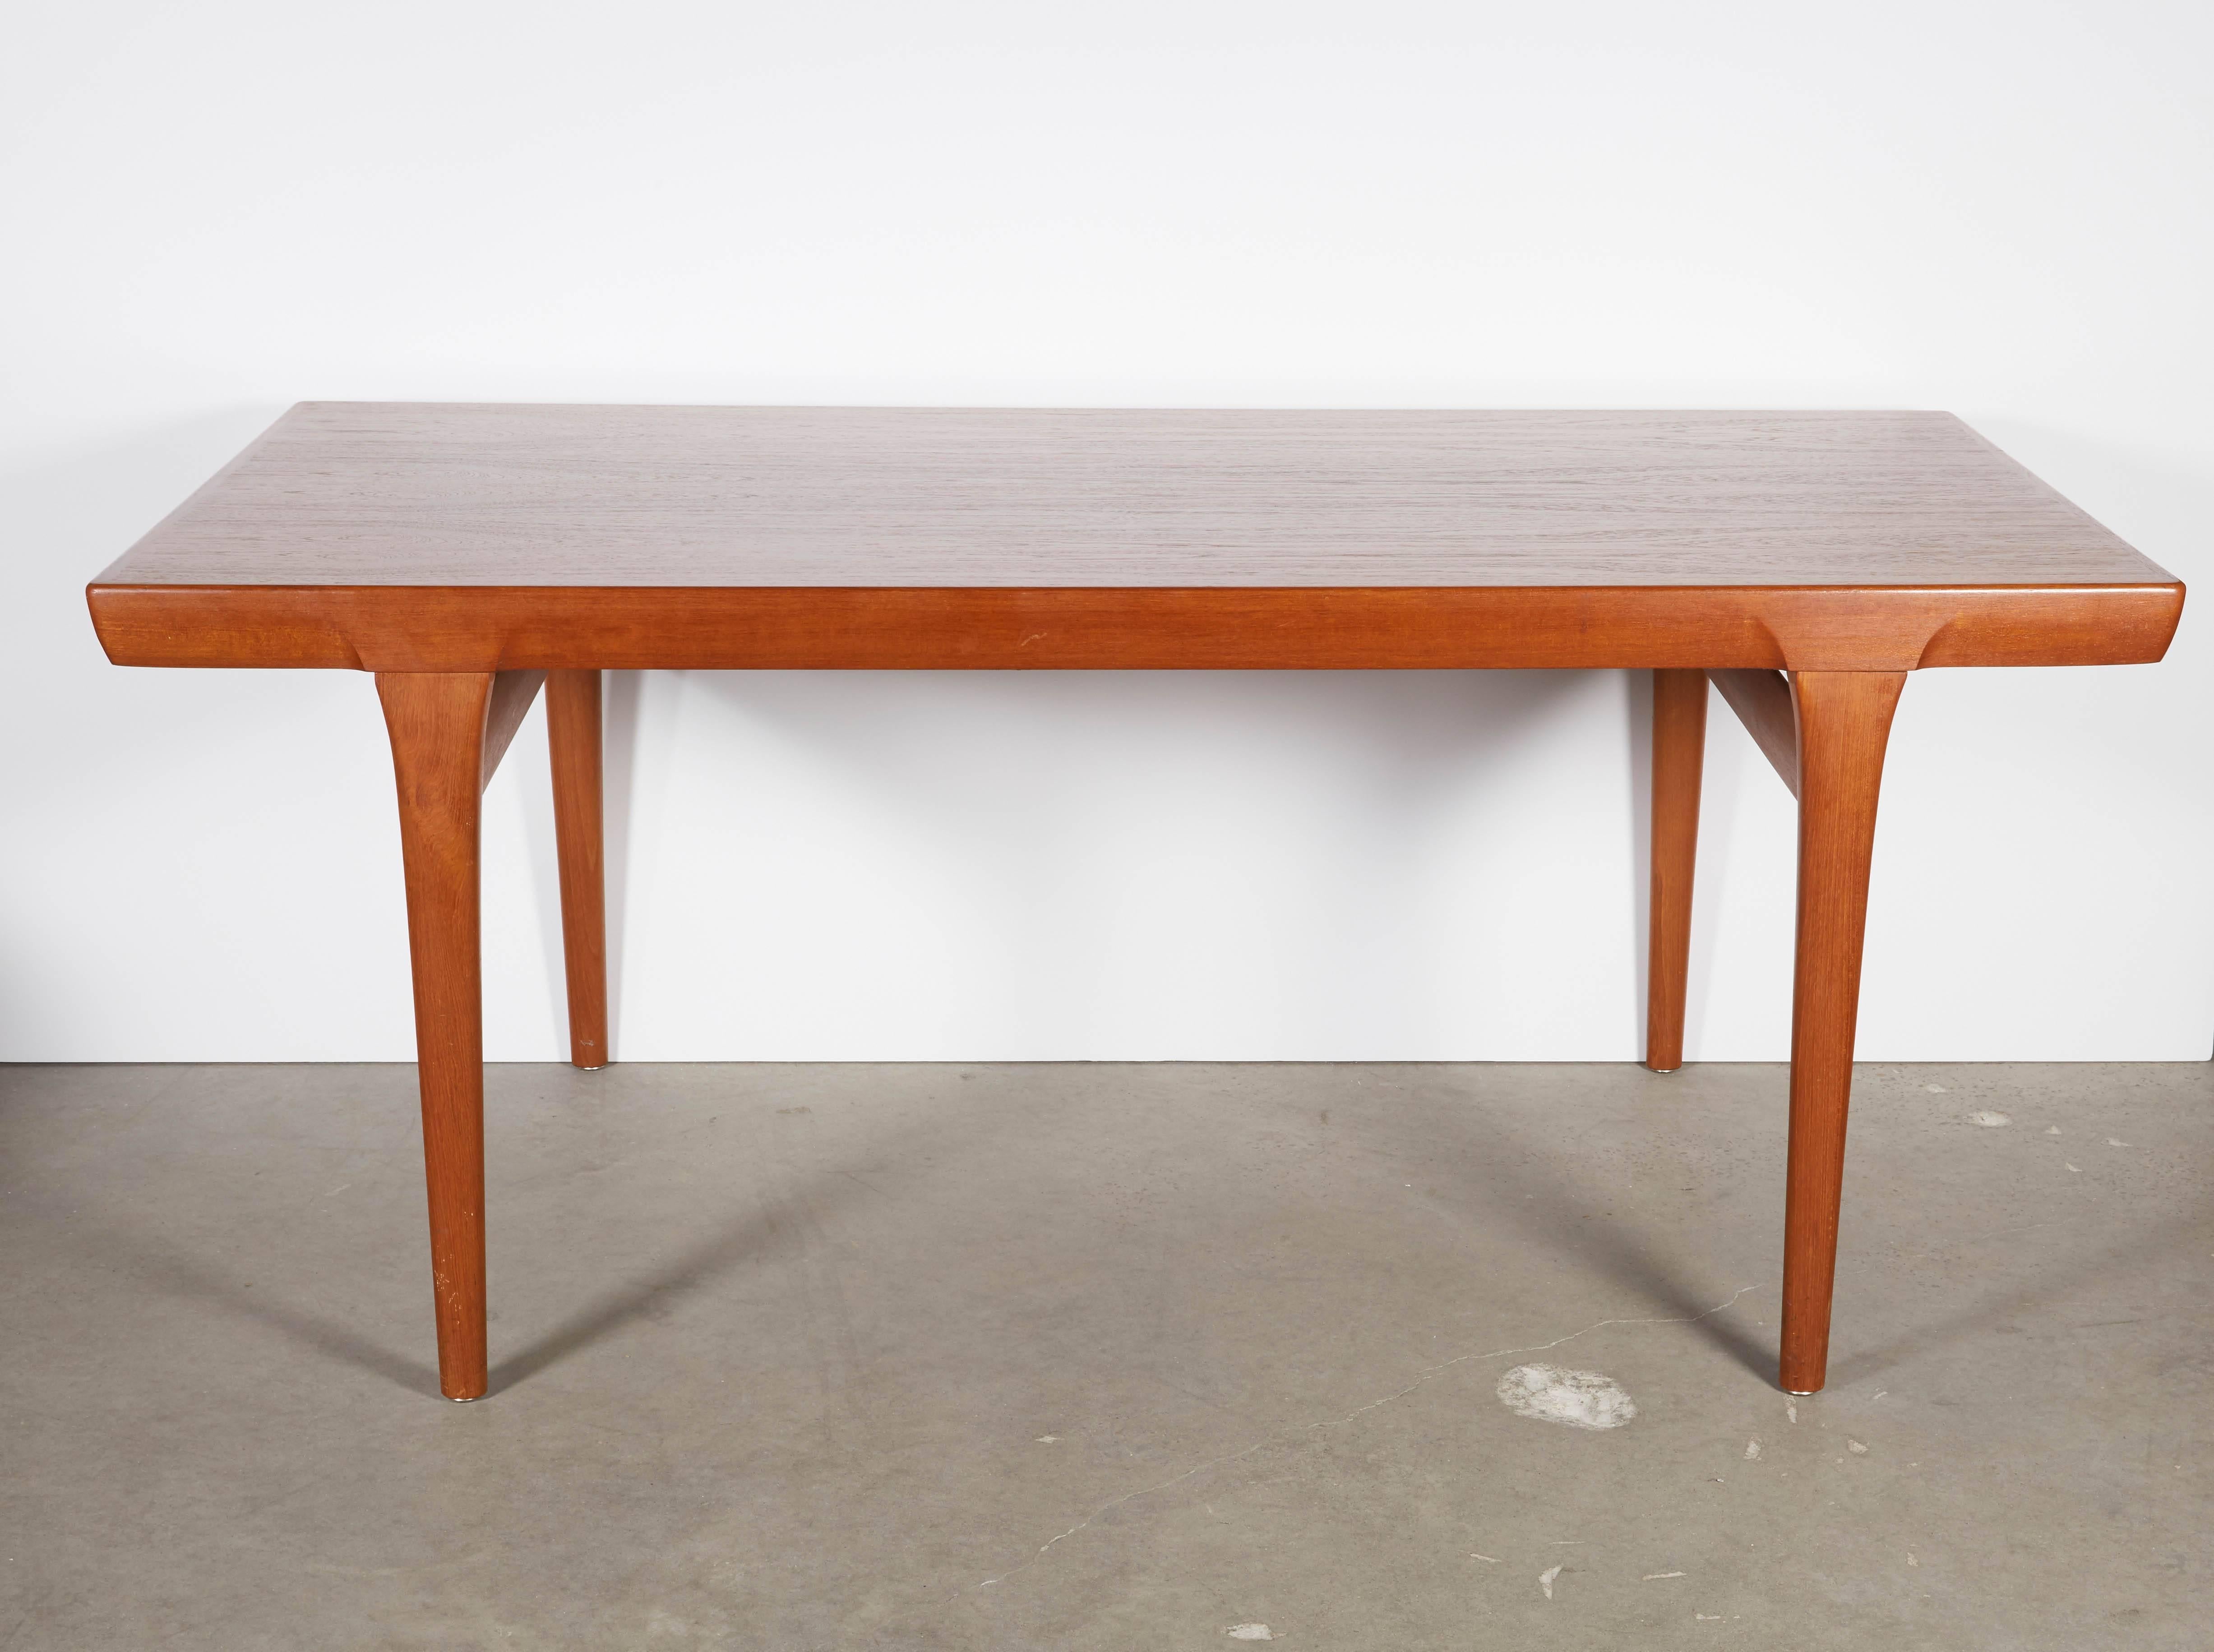 Vintage 1960s Ib Kofod-Larsen Dining Table with 2 Leaves

This expandable teak dining table is in excellent condition, and has 2 leaves that store under the top of the table. Leaves are 14" each, the table seats 10 people or more if someone